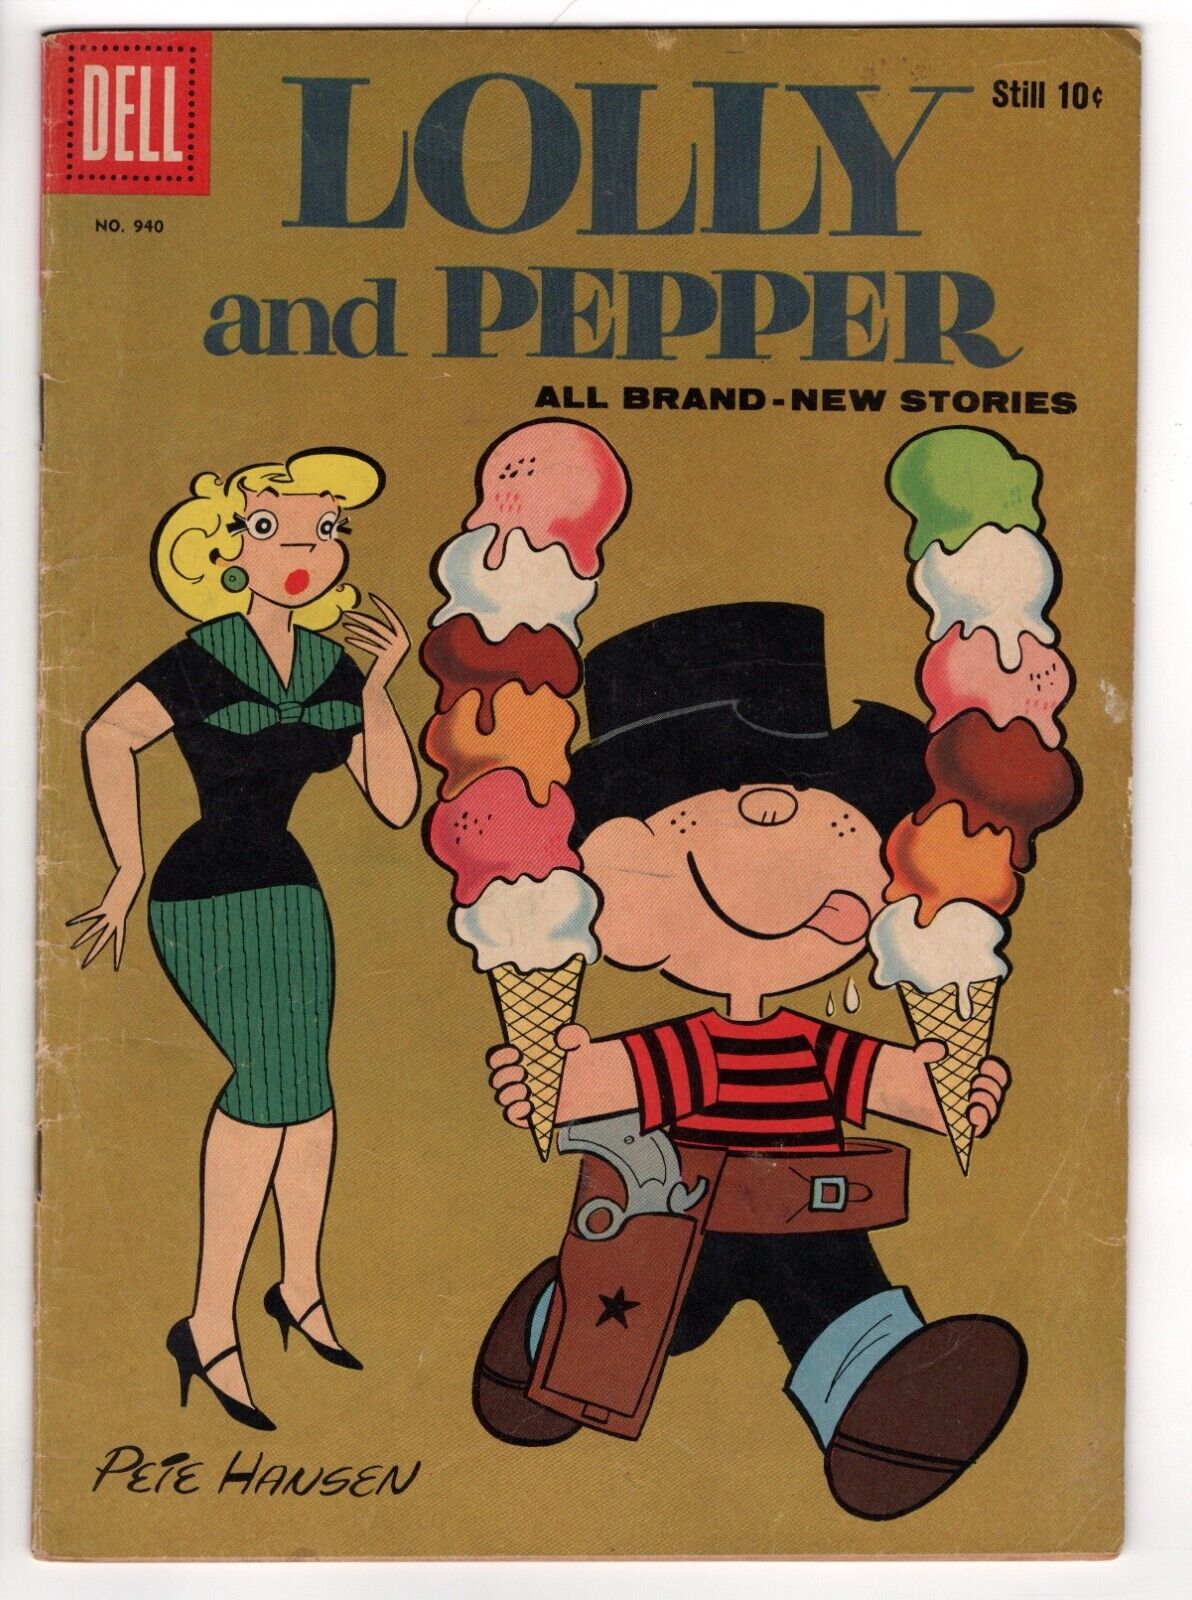 FOUR COLOR 940  LOLLY and PEPPER  Dell  1958  Good  / Pete Hansen story & art